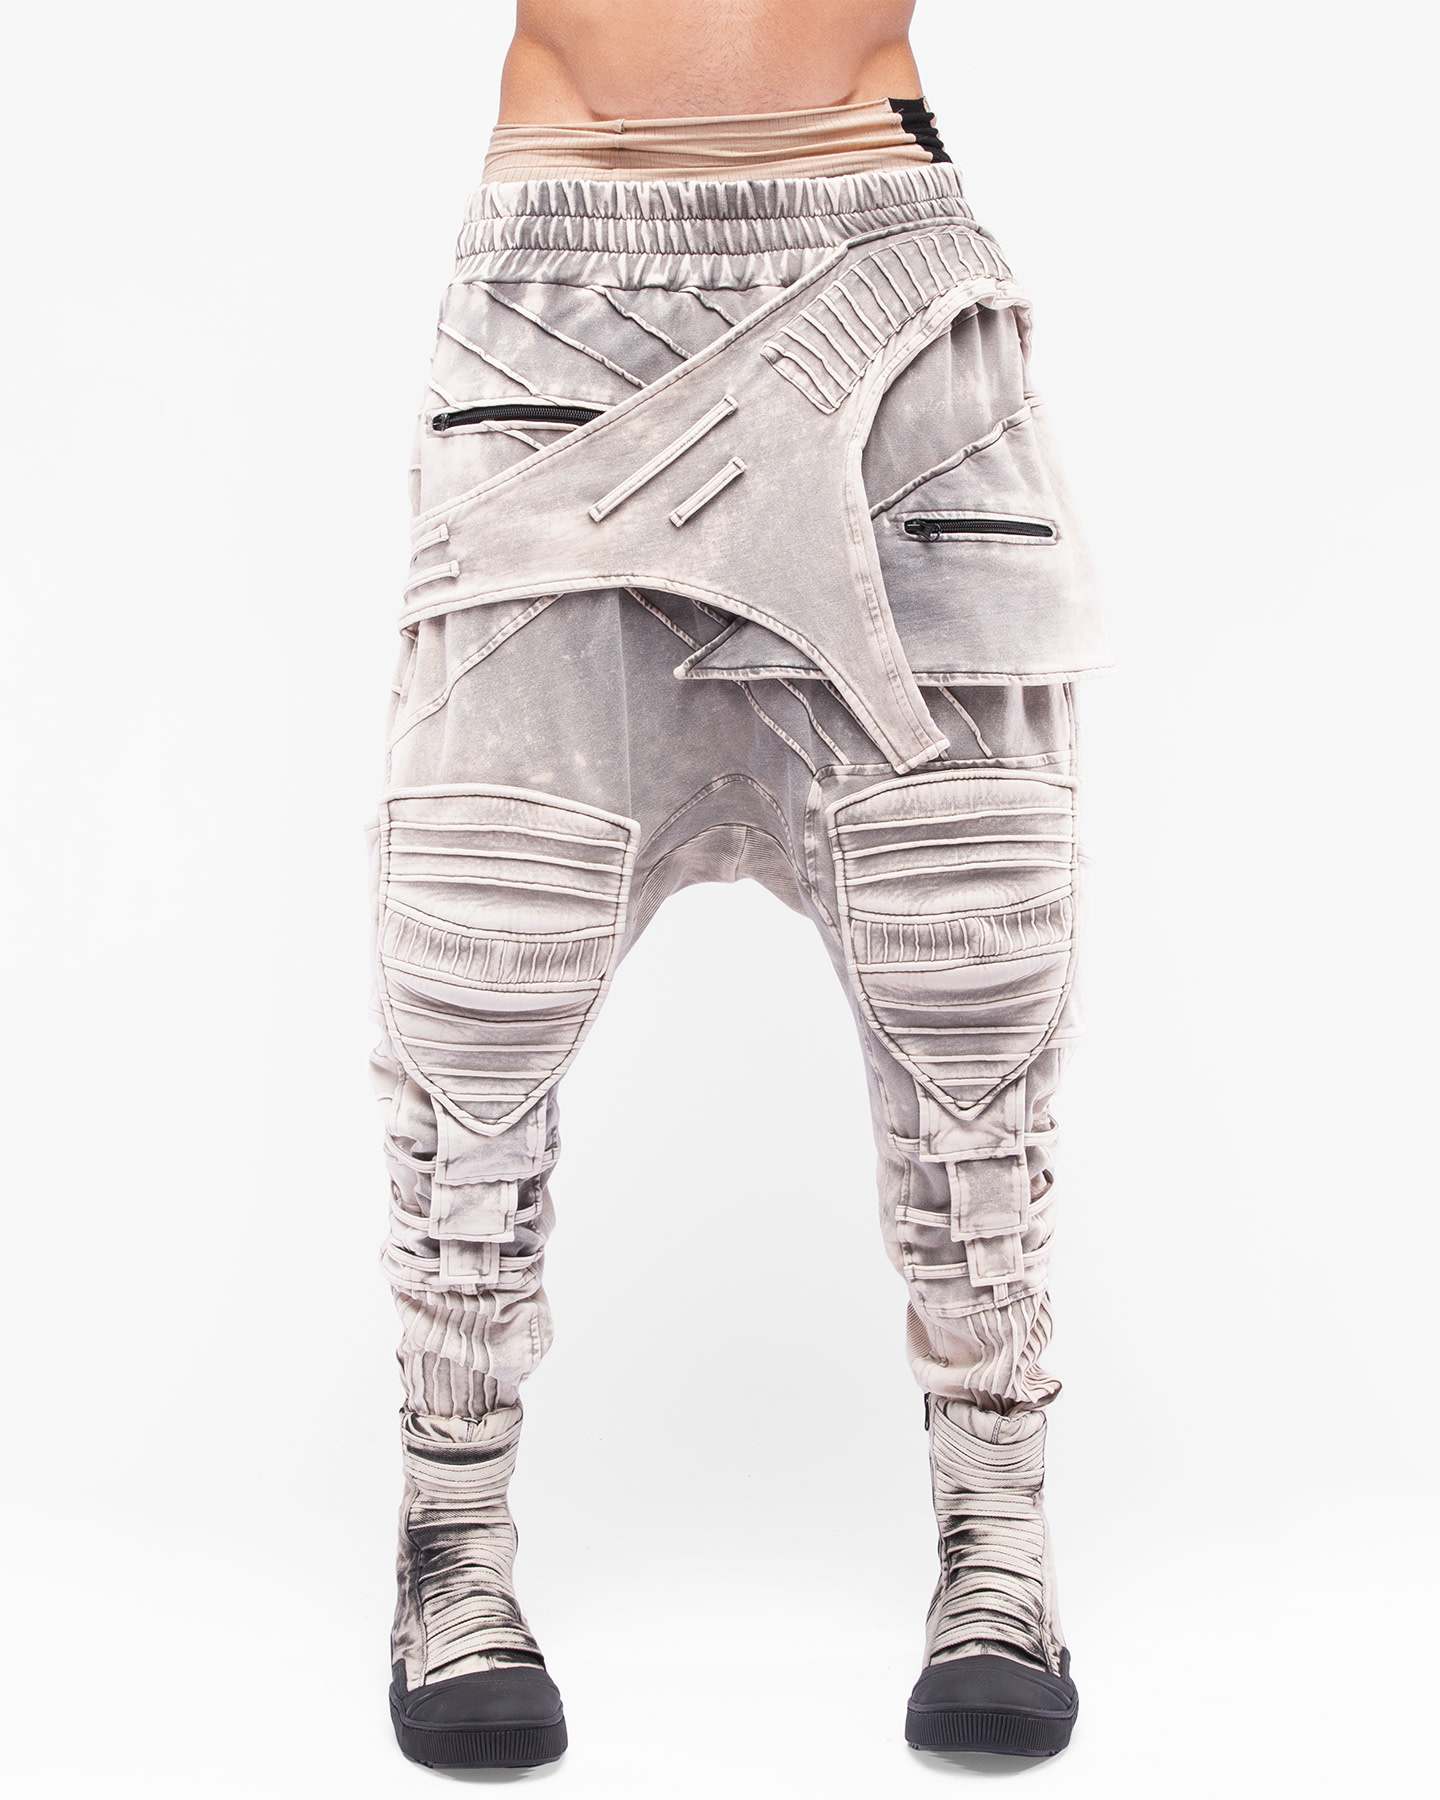 Trousers Dusty Armour in dirty white by Demobaza | Shop Untitled NYC ...